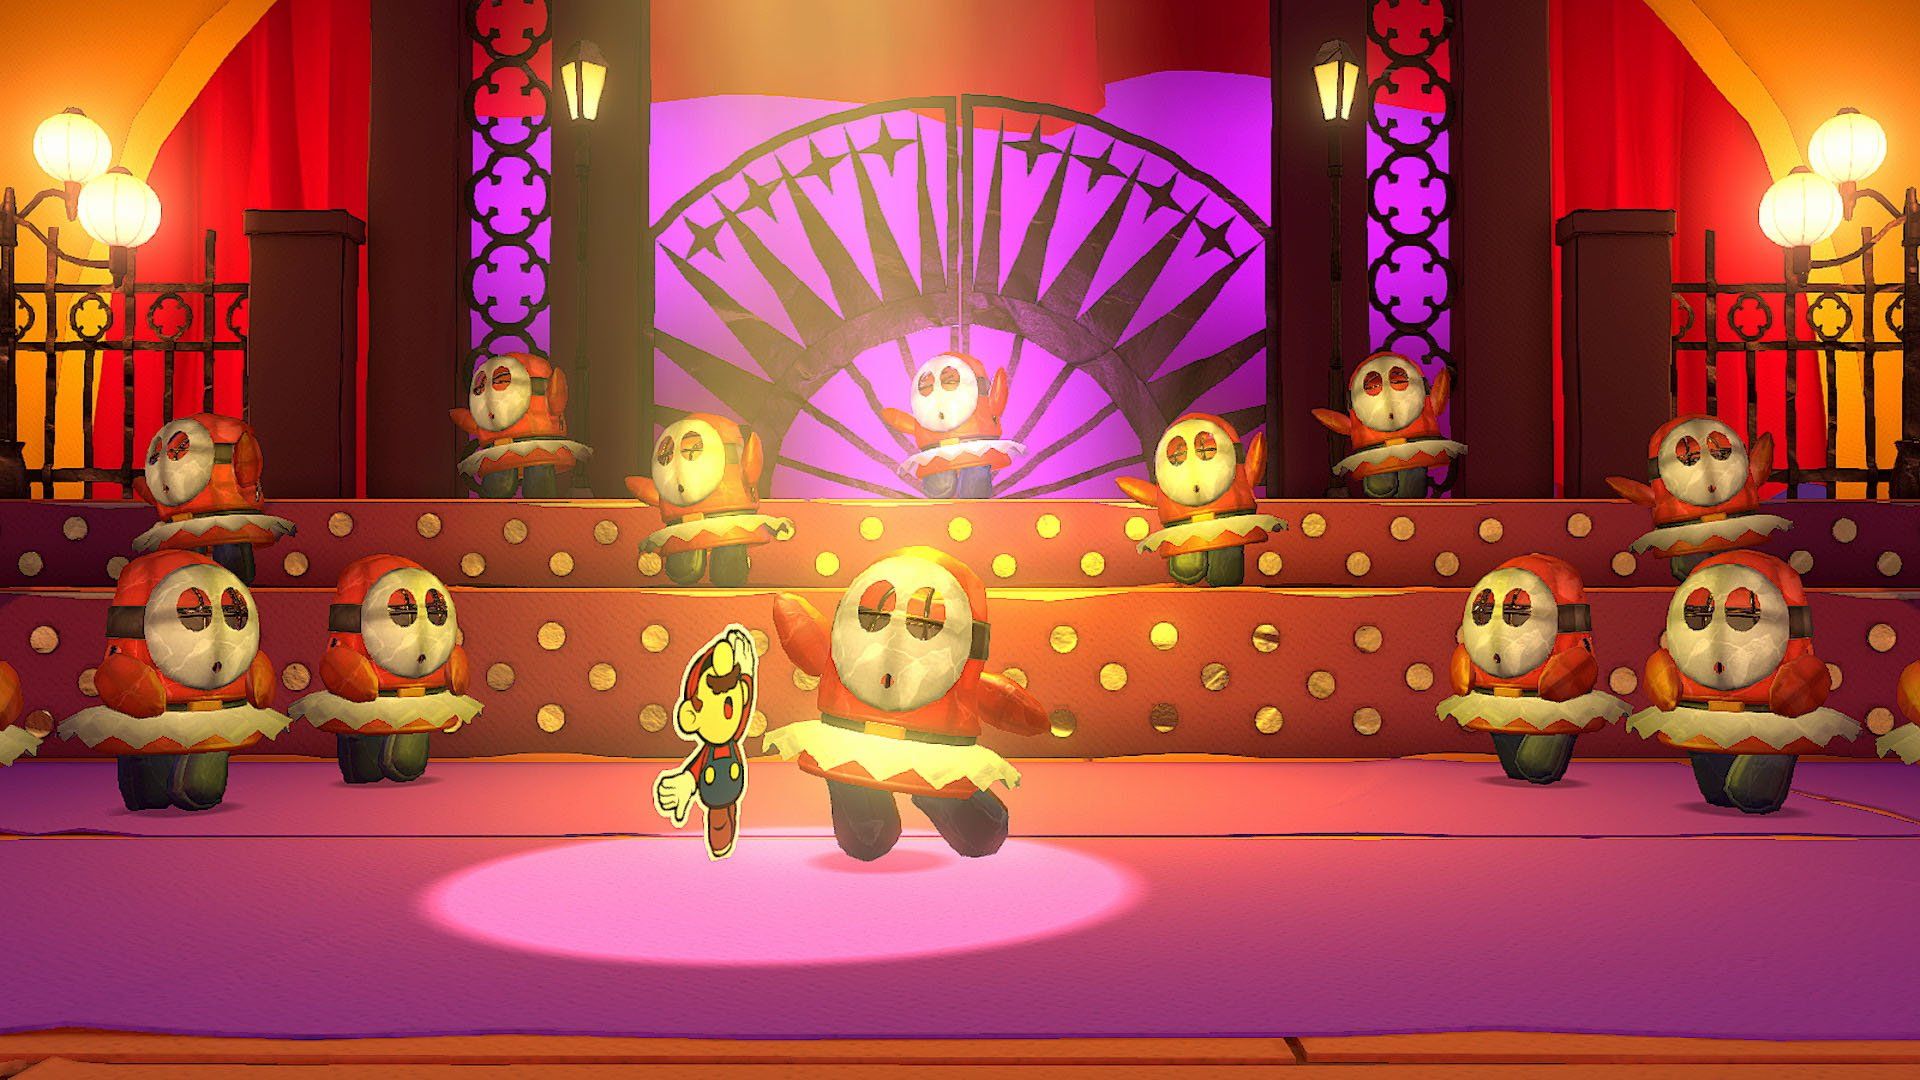 Nintendo Shares A Quick Taste Of Paper ﻿Mario: The Origami King's